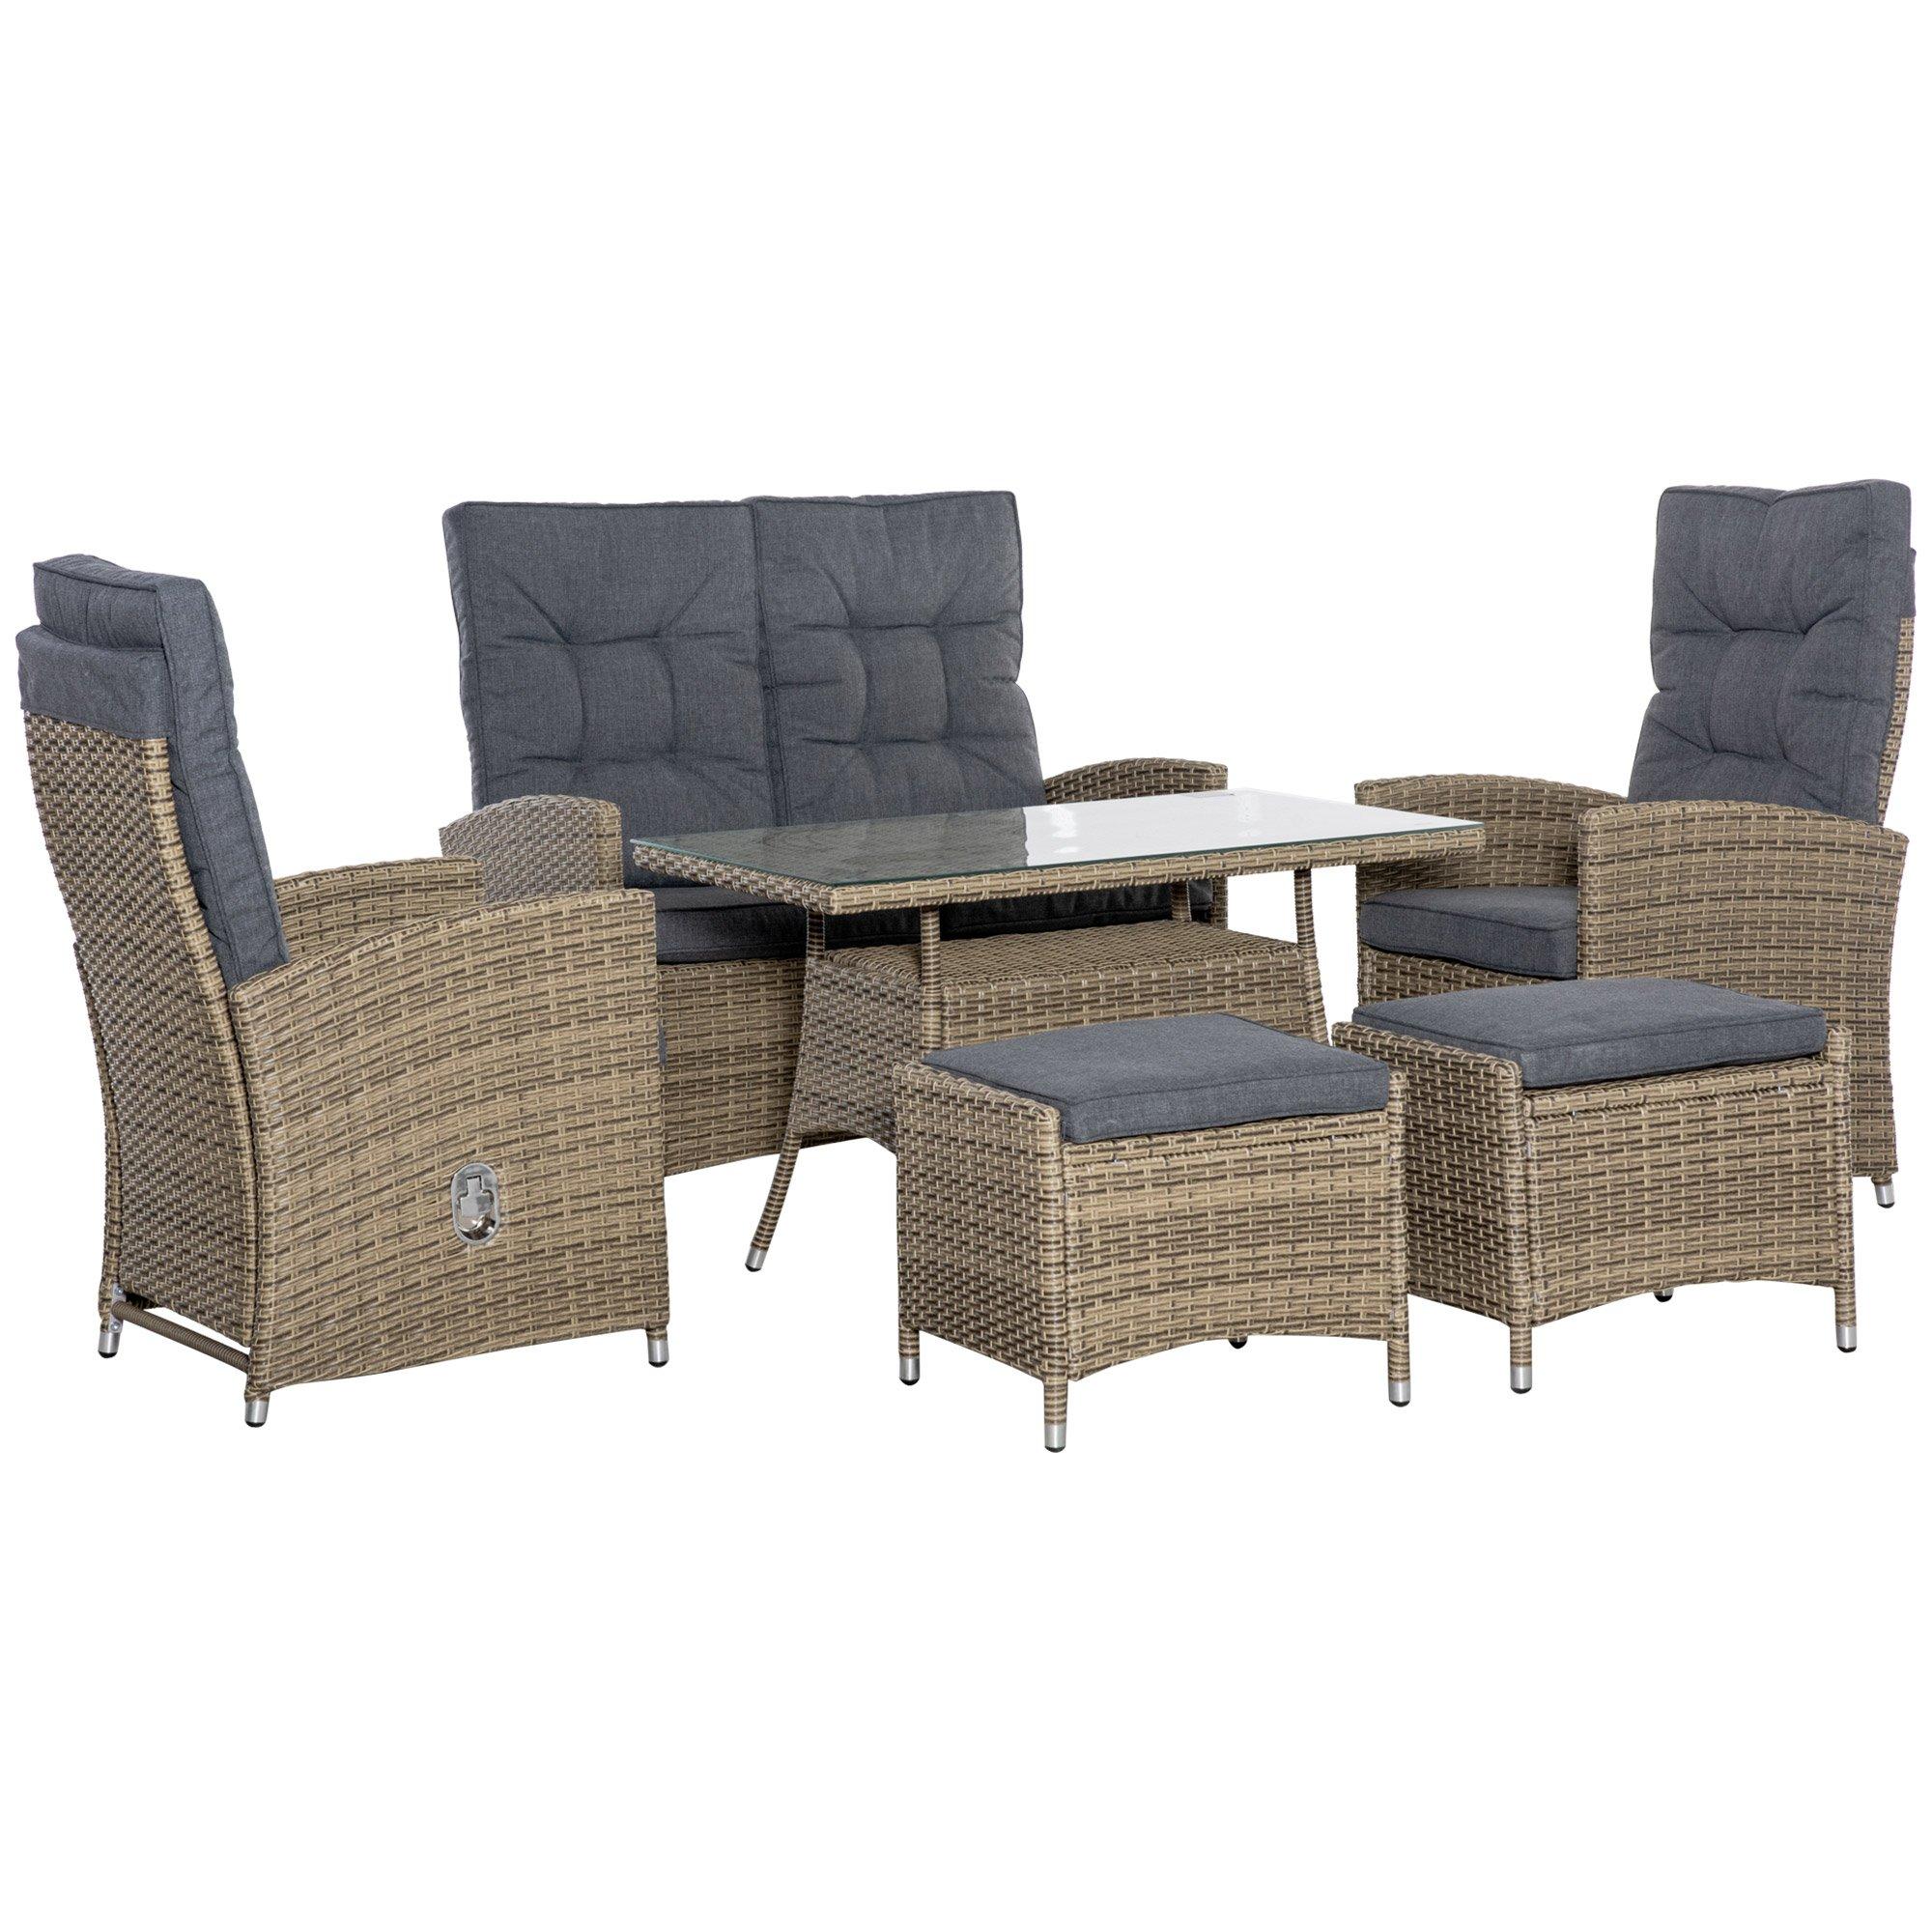 6 PCS PE Rattan Dining Set Conversation Furniture Set with Chaise Lounge Chair